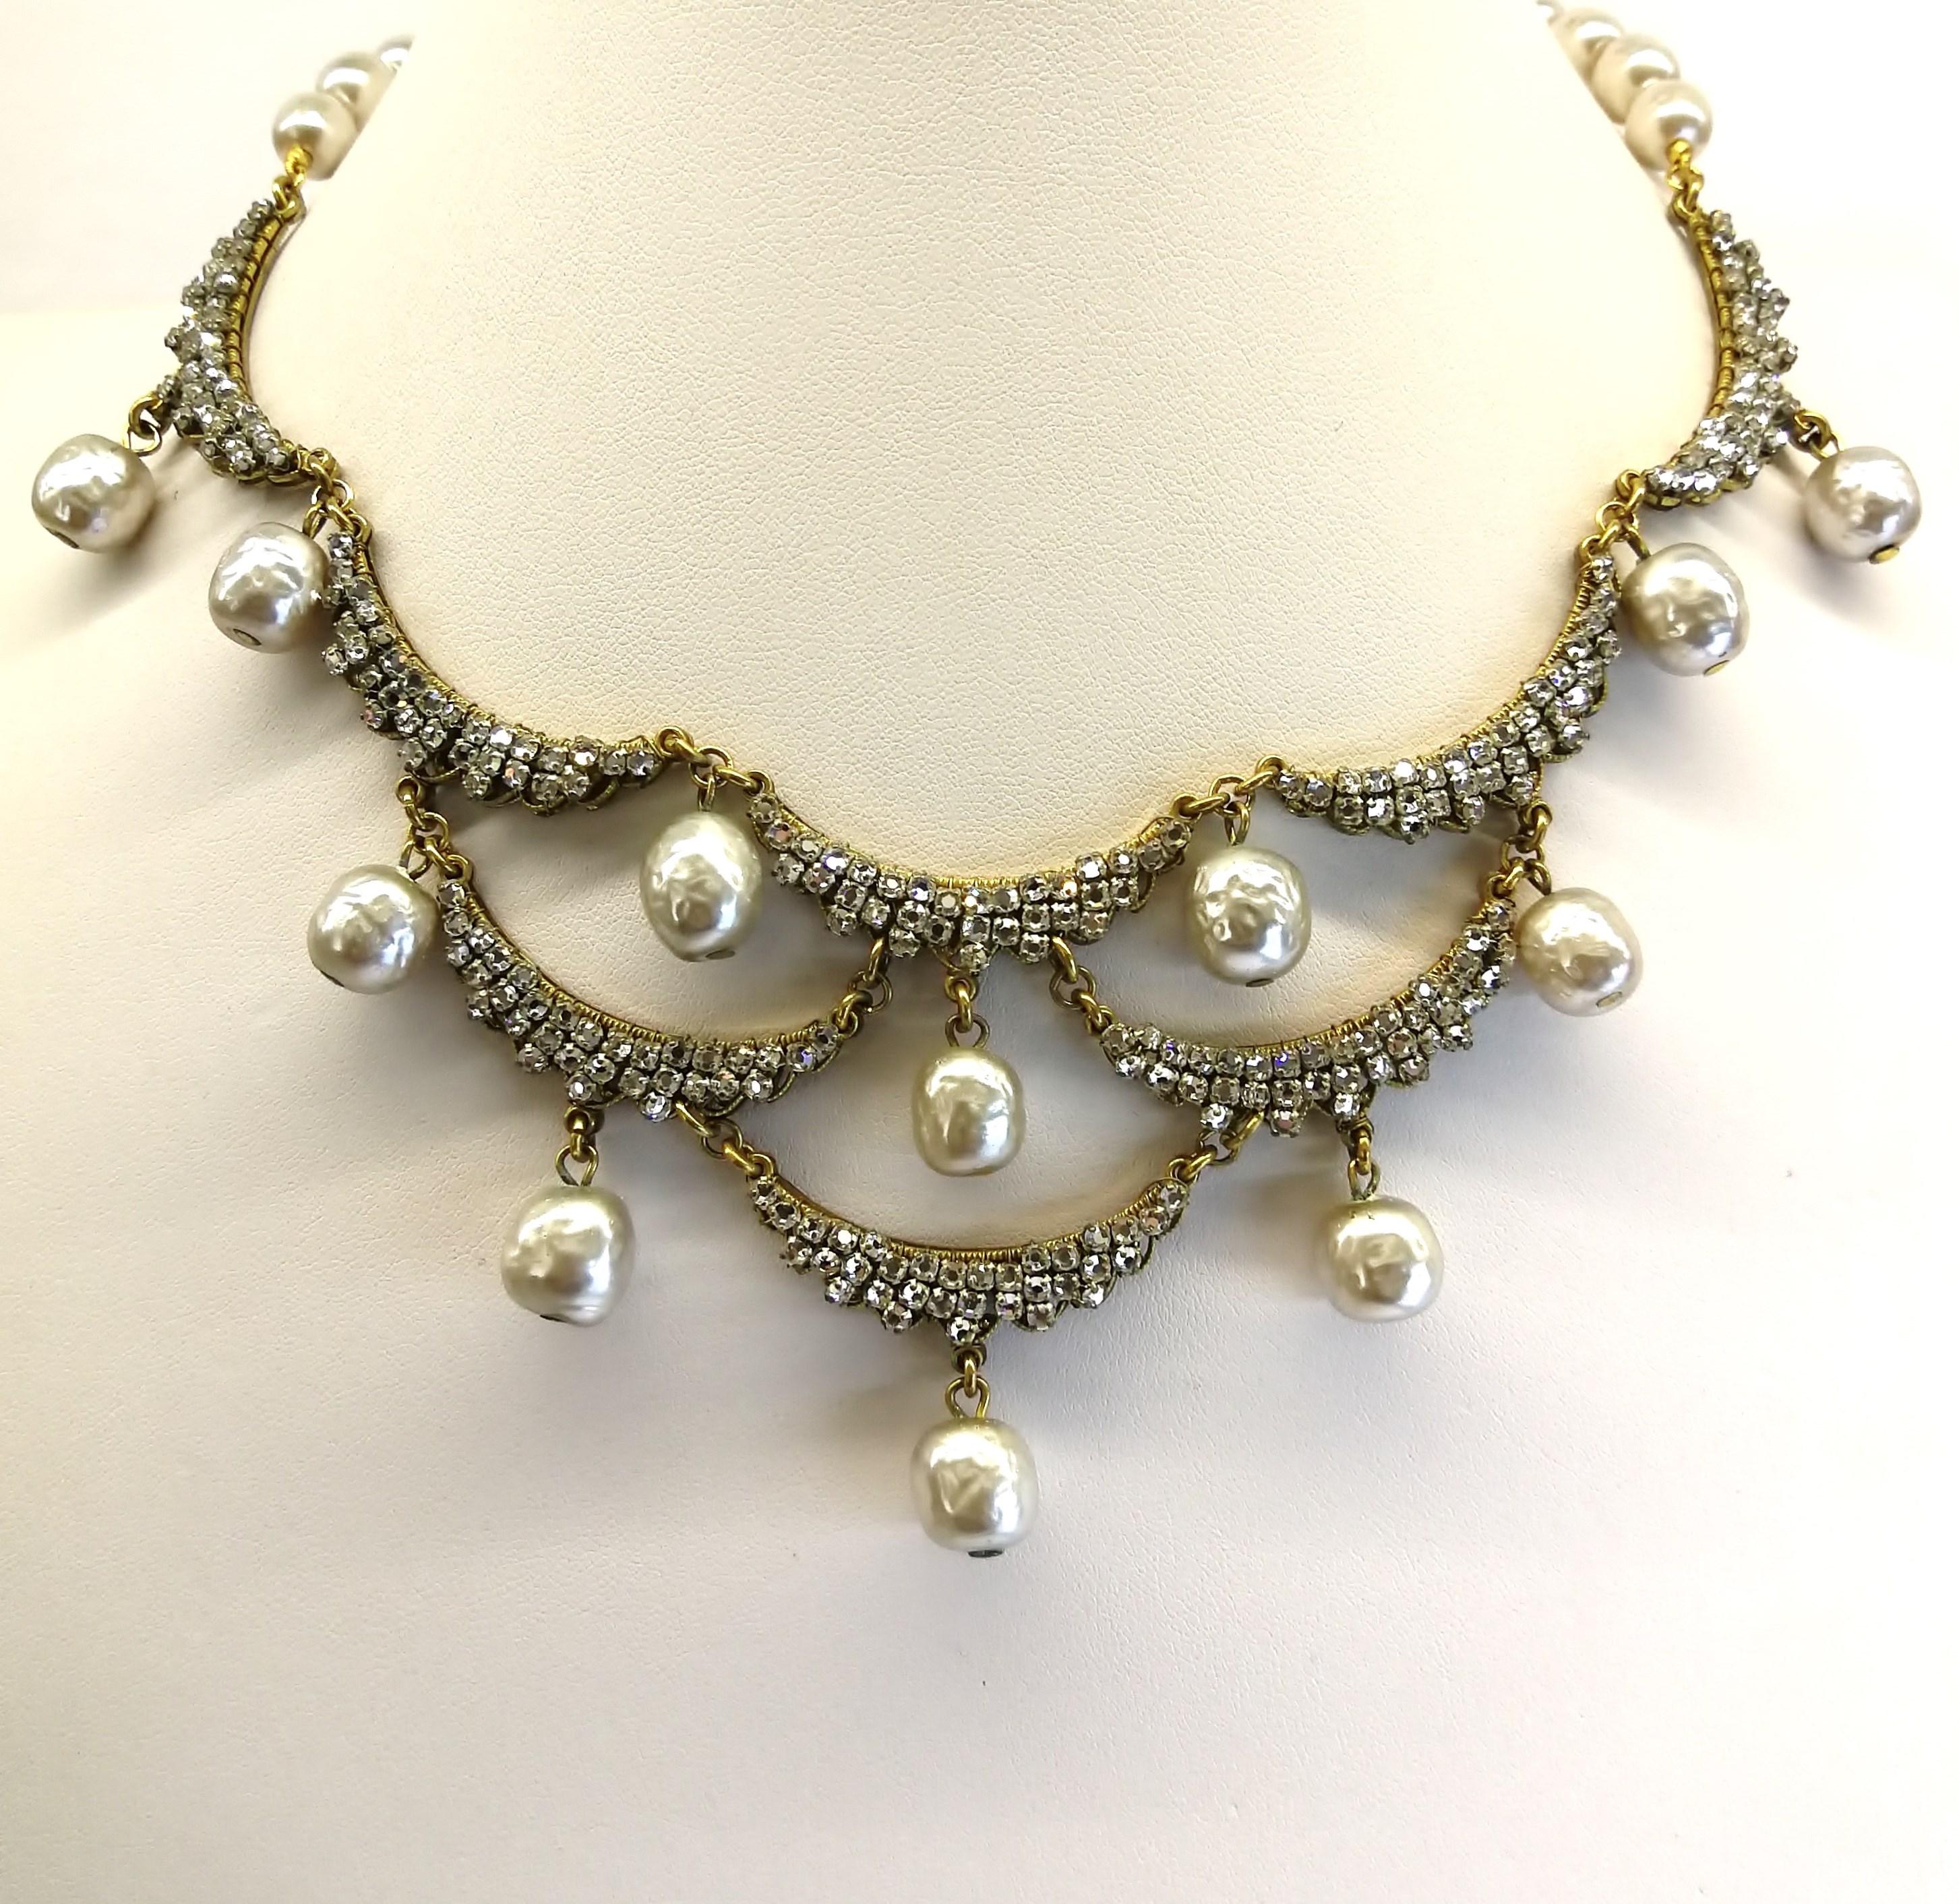 A beautiful and very elegant 'bib' style necklace, with matching earrings, from the 1960s , designed by Robert Clark for Miriam Haskell. Gentle half moon/crescent tiers of rose montes, highlighted with single drop baroque pearls, graduate down to a